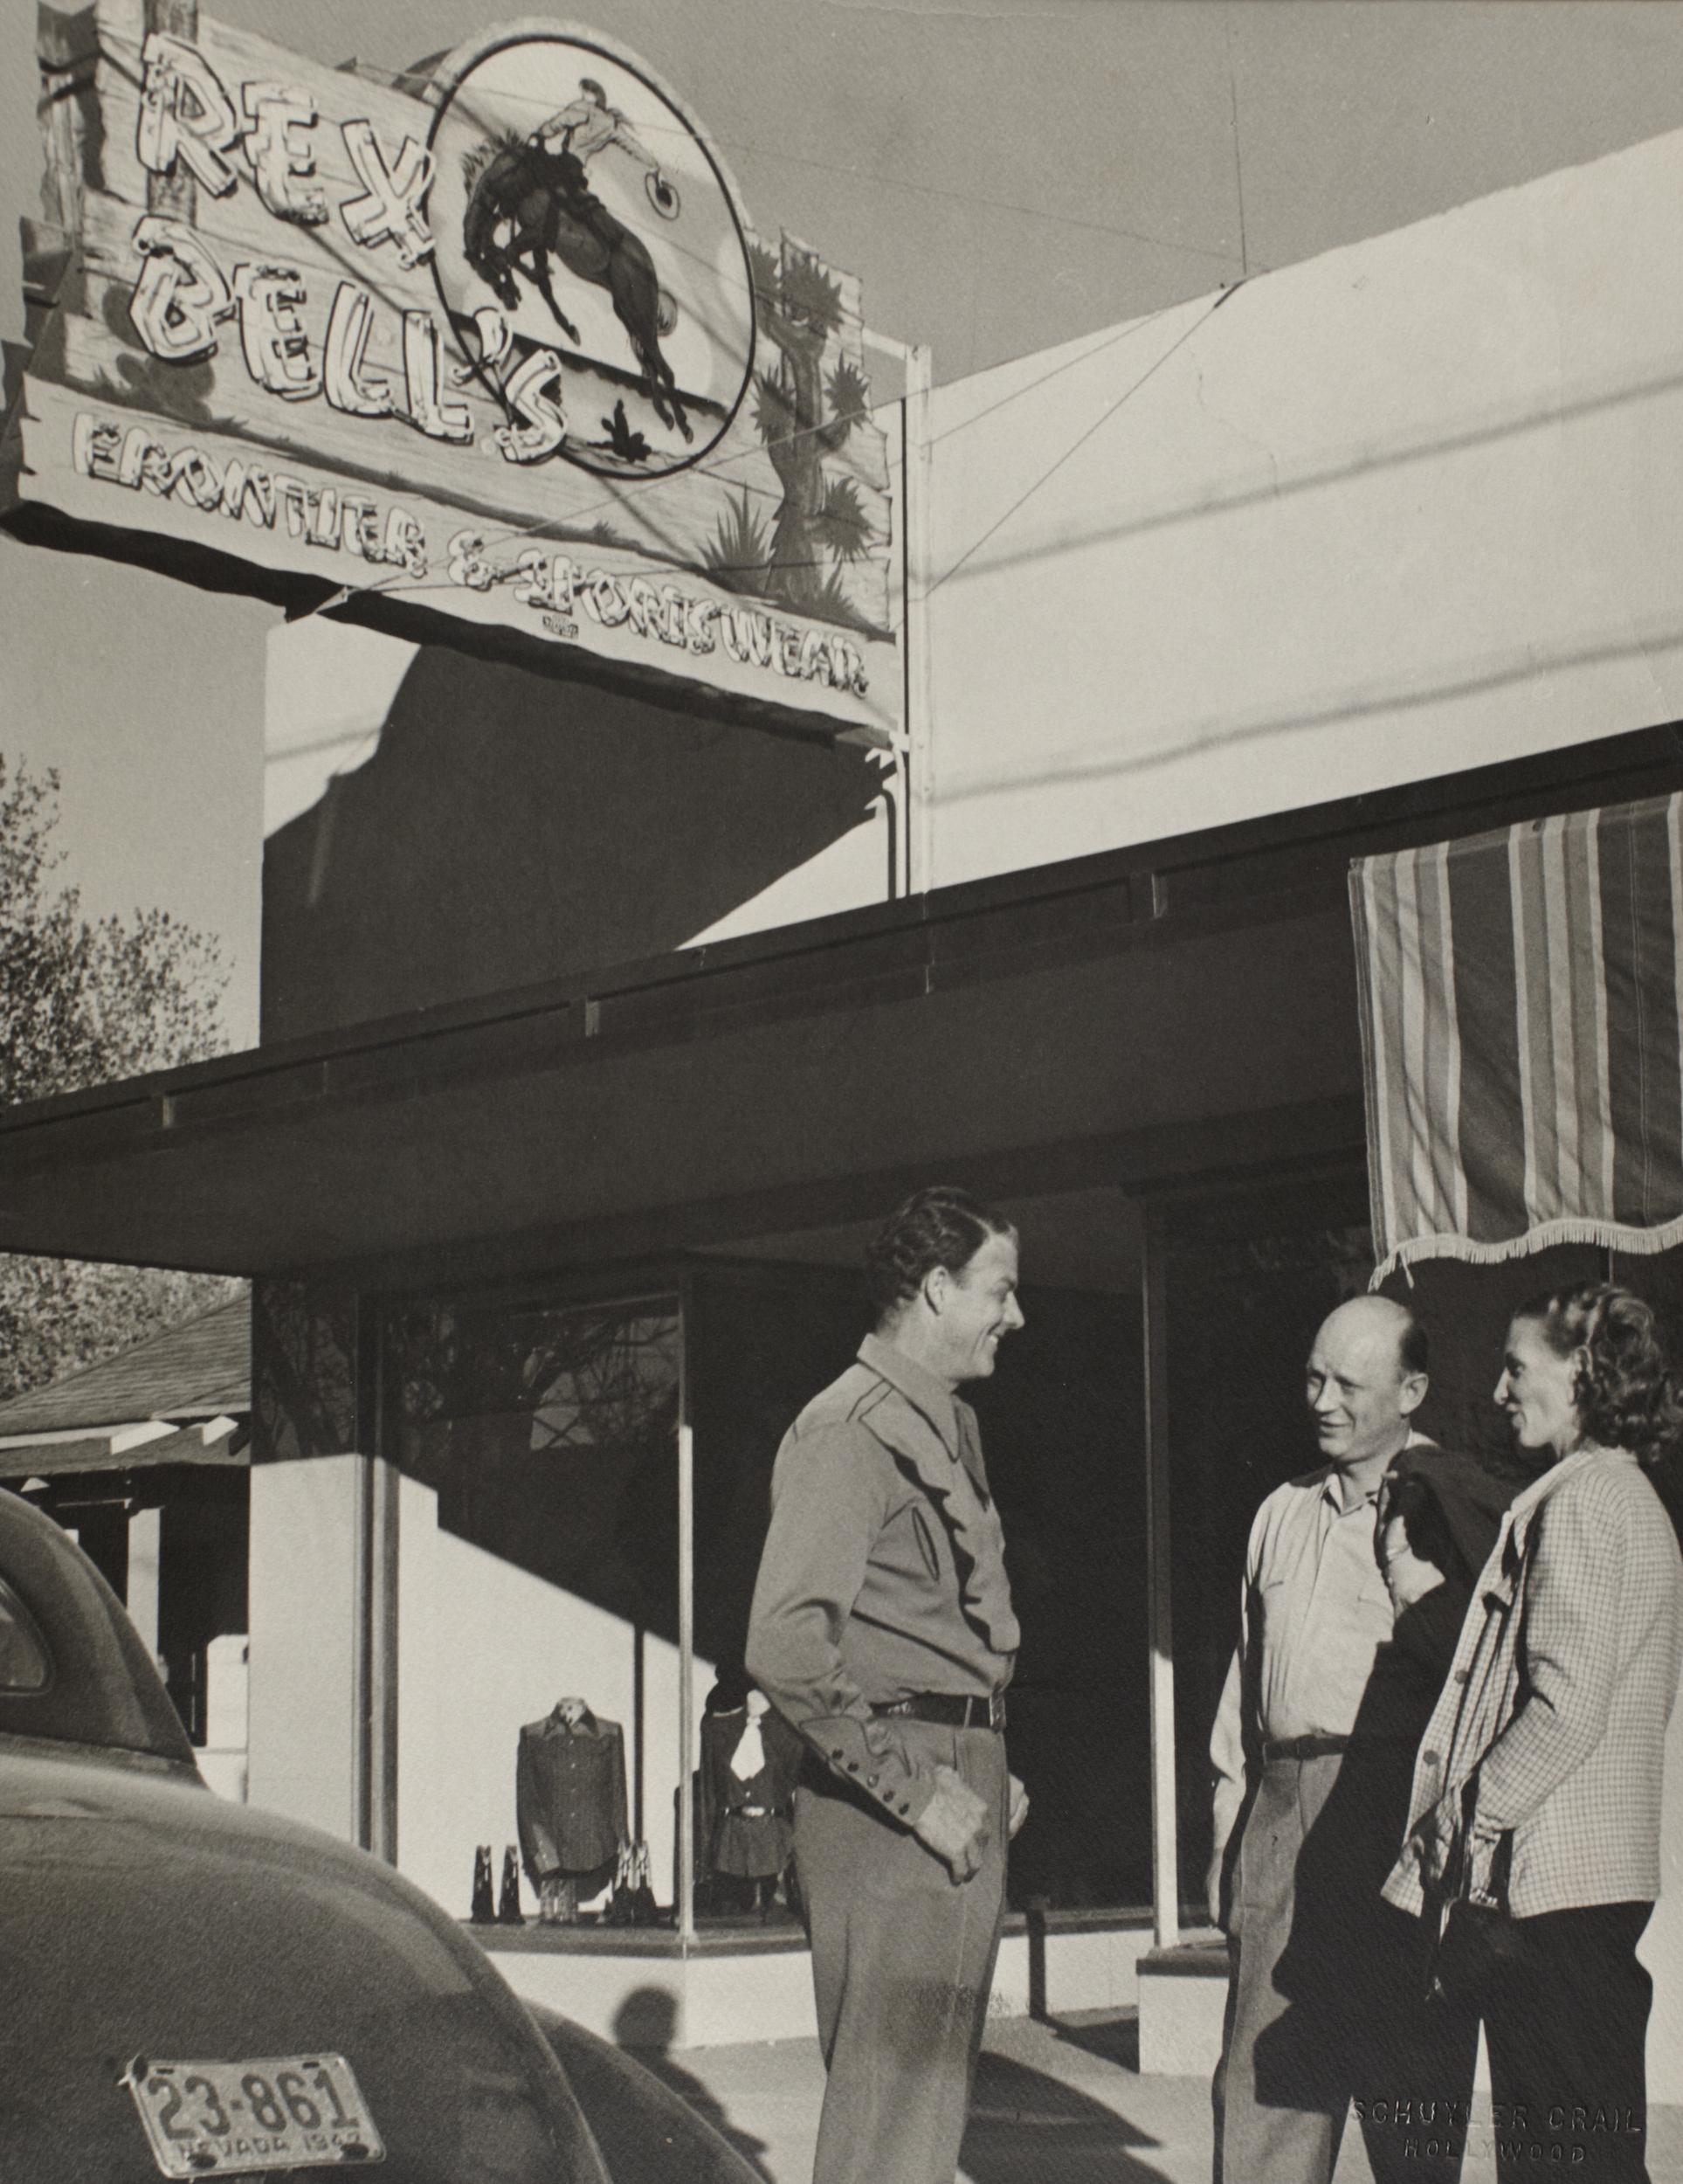 Rex Bell with two unidentified people outside of the "Rex Bell's Frontier & Sportswear" store in Las Vegas, Nevada: photographic print